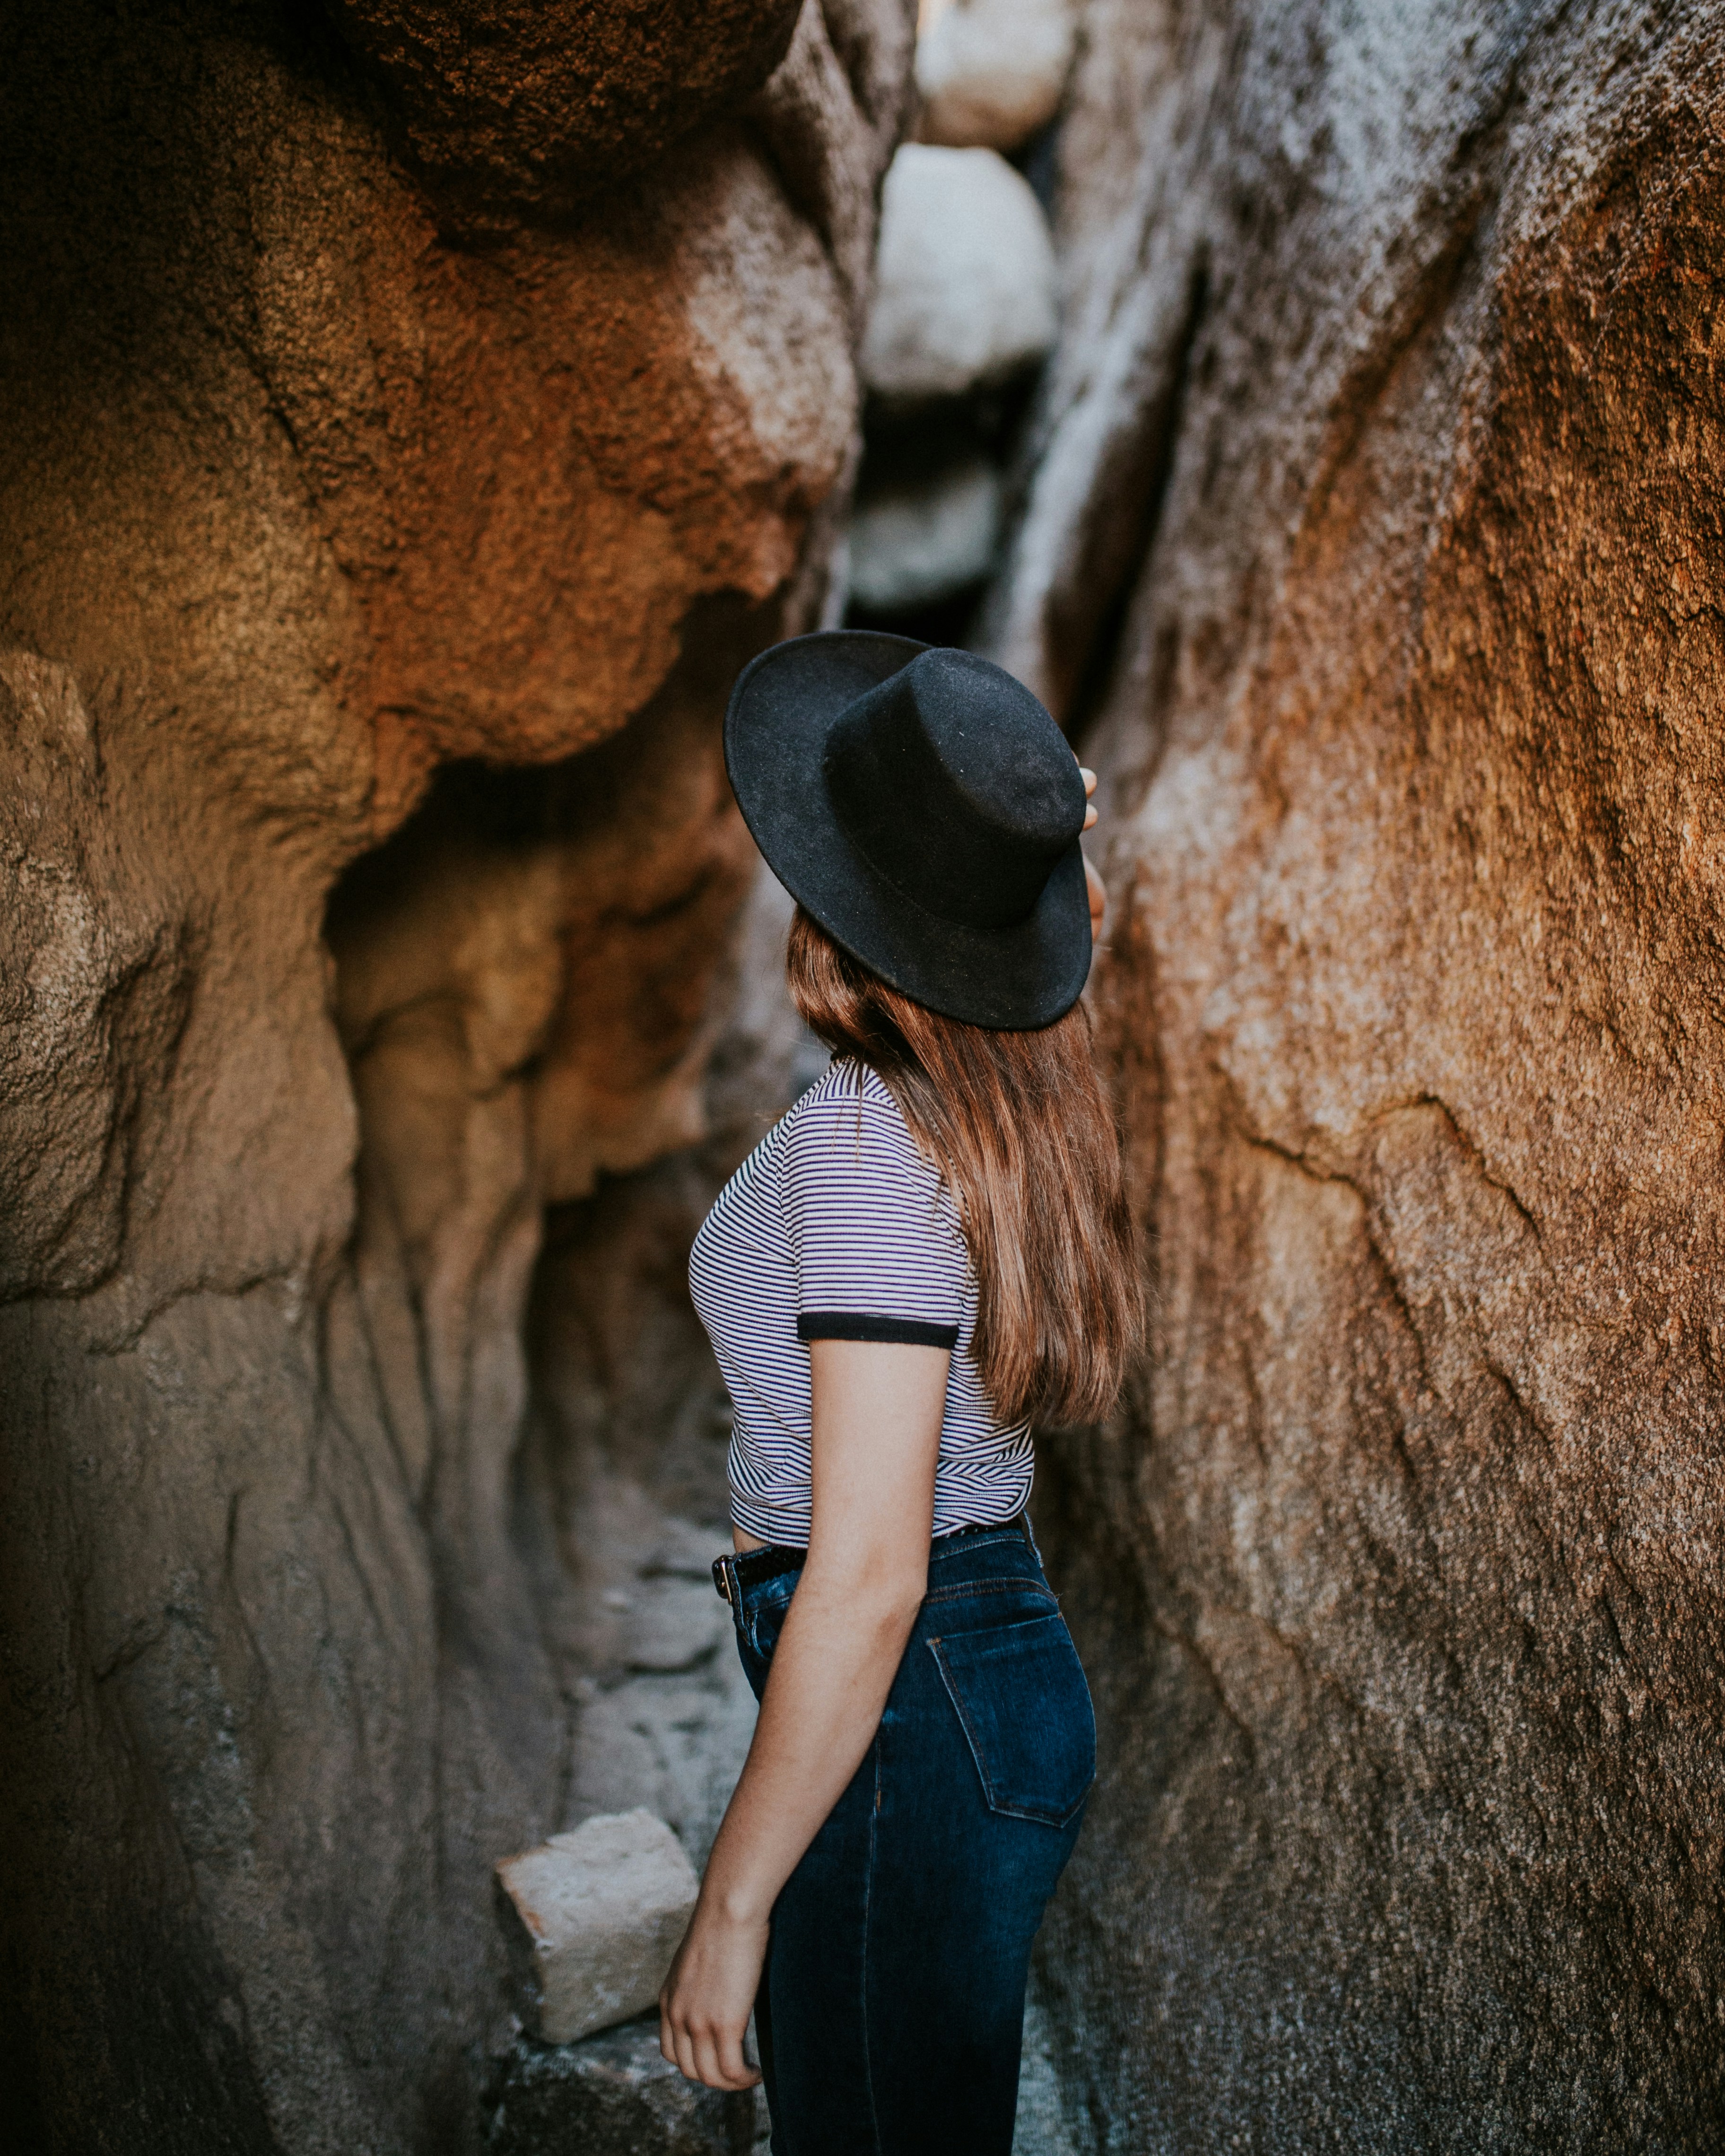 My sister and I found this awesome little slot canyon among Joshua Tree’s numerous rock formations. It was so cool exploring this spot. This little canyon reminds me of the insanely beautiful ones found in Antelope Canyon, which is pretty high on my bucket list of places to go ASAP. We love exploring, and I feel like this photo encompasses that.